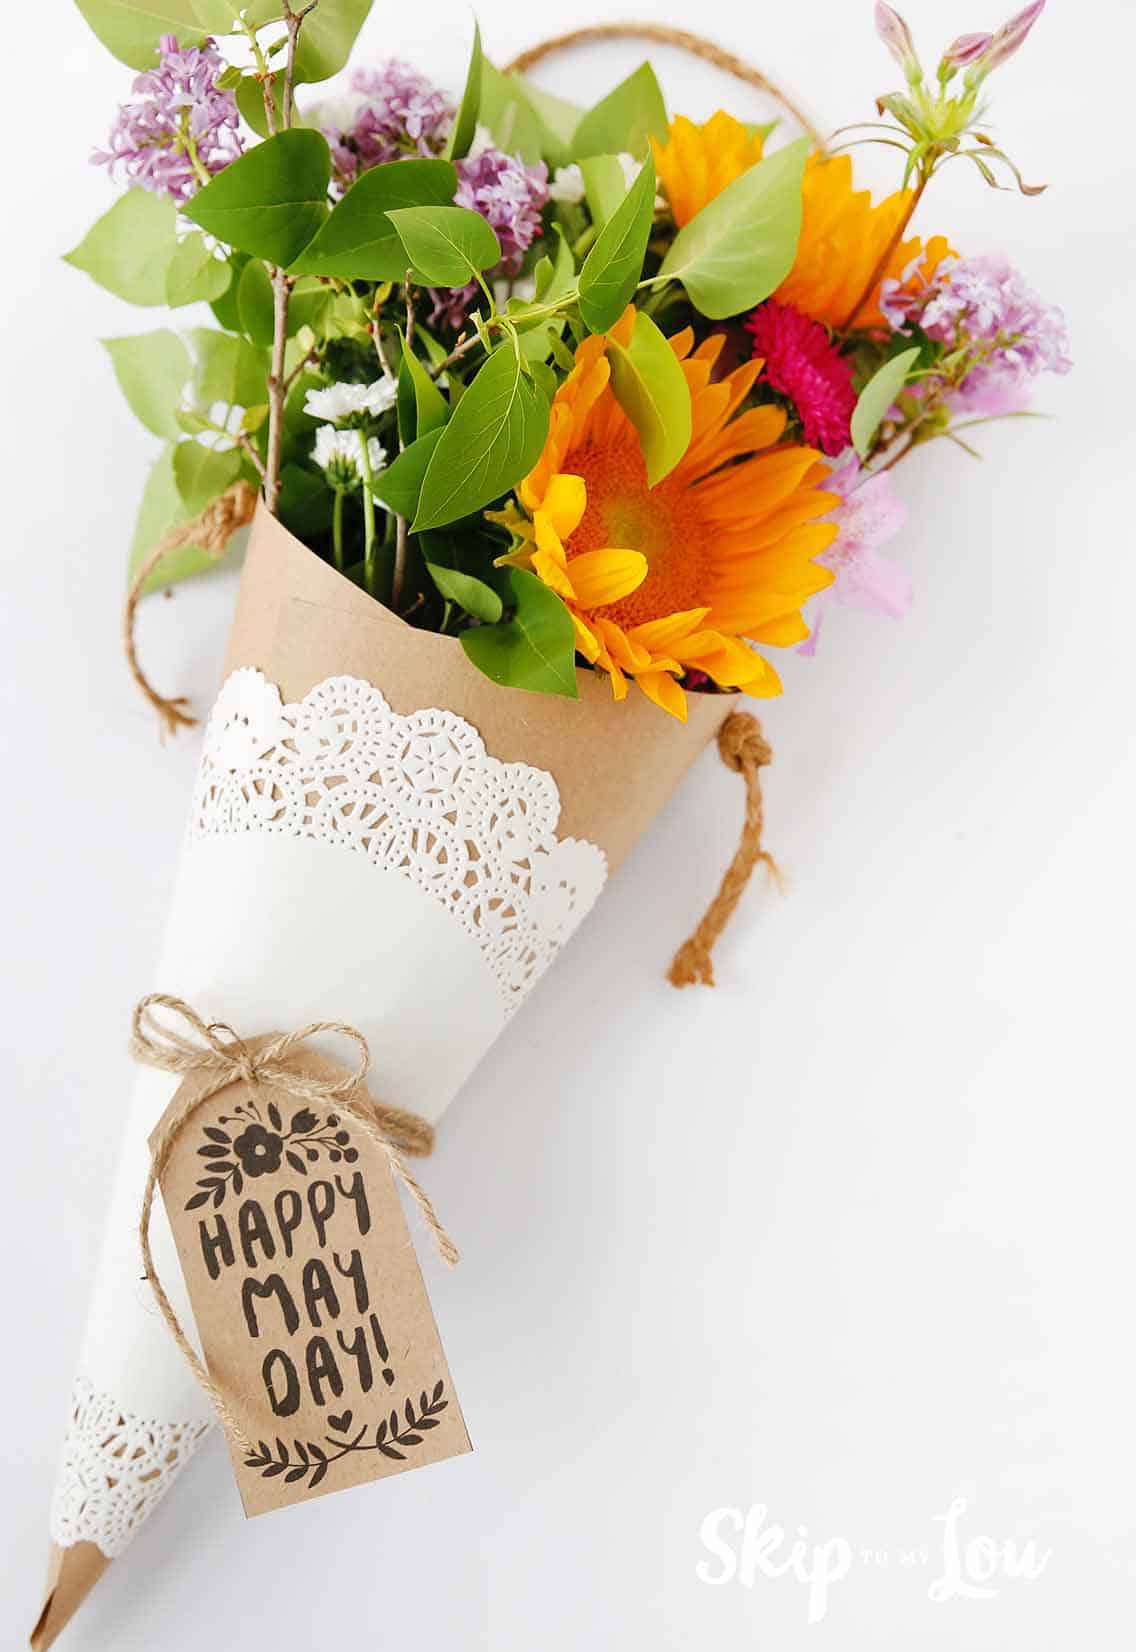 The Cutest DIY May Day Baskets to Celebrate May Day!